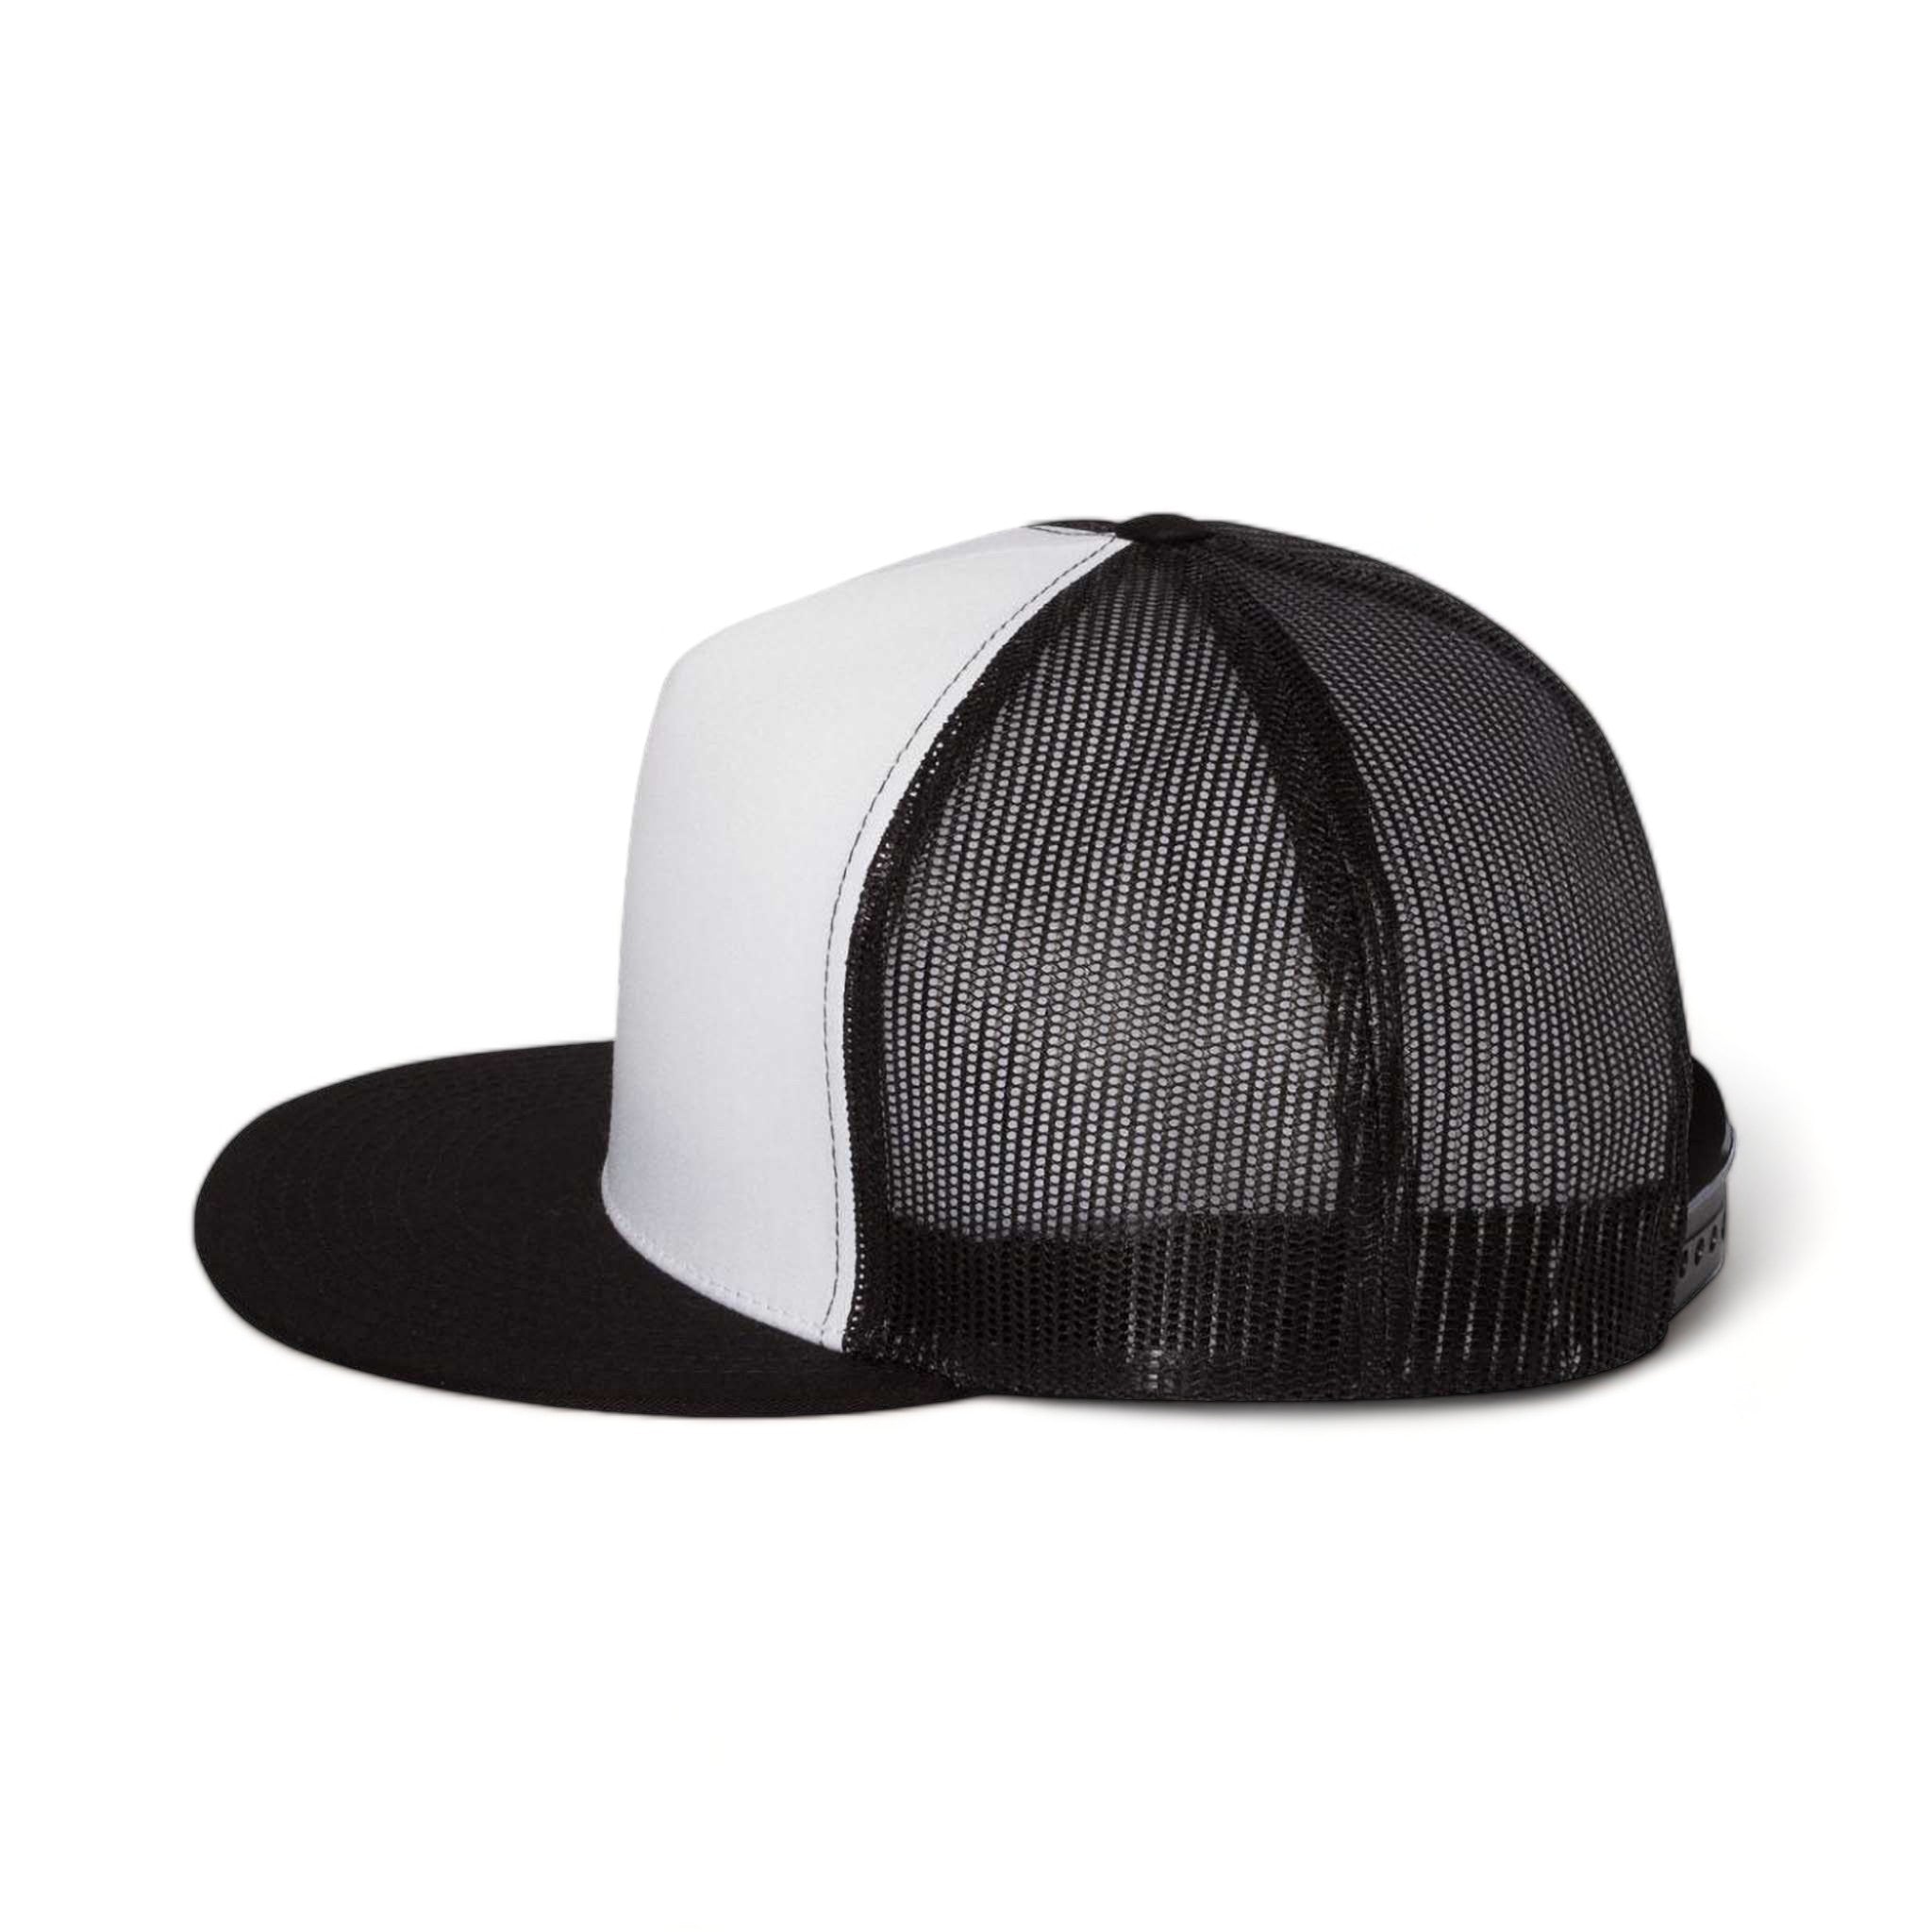 Side view of YP Classics 6006 custom hat in black, white and black